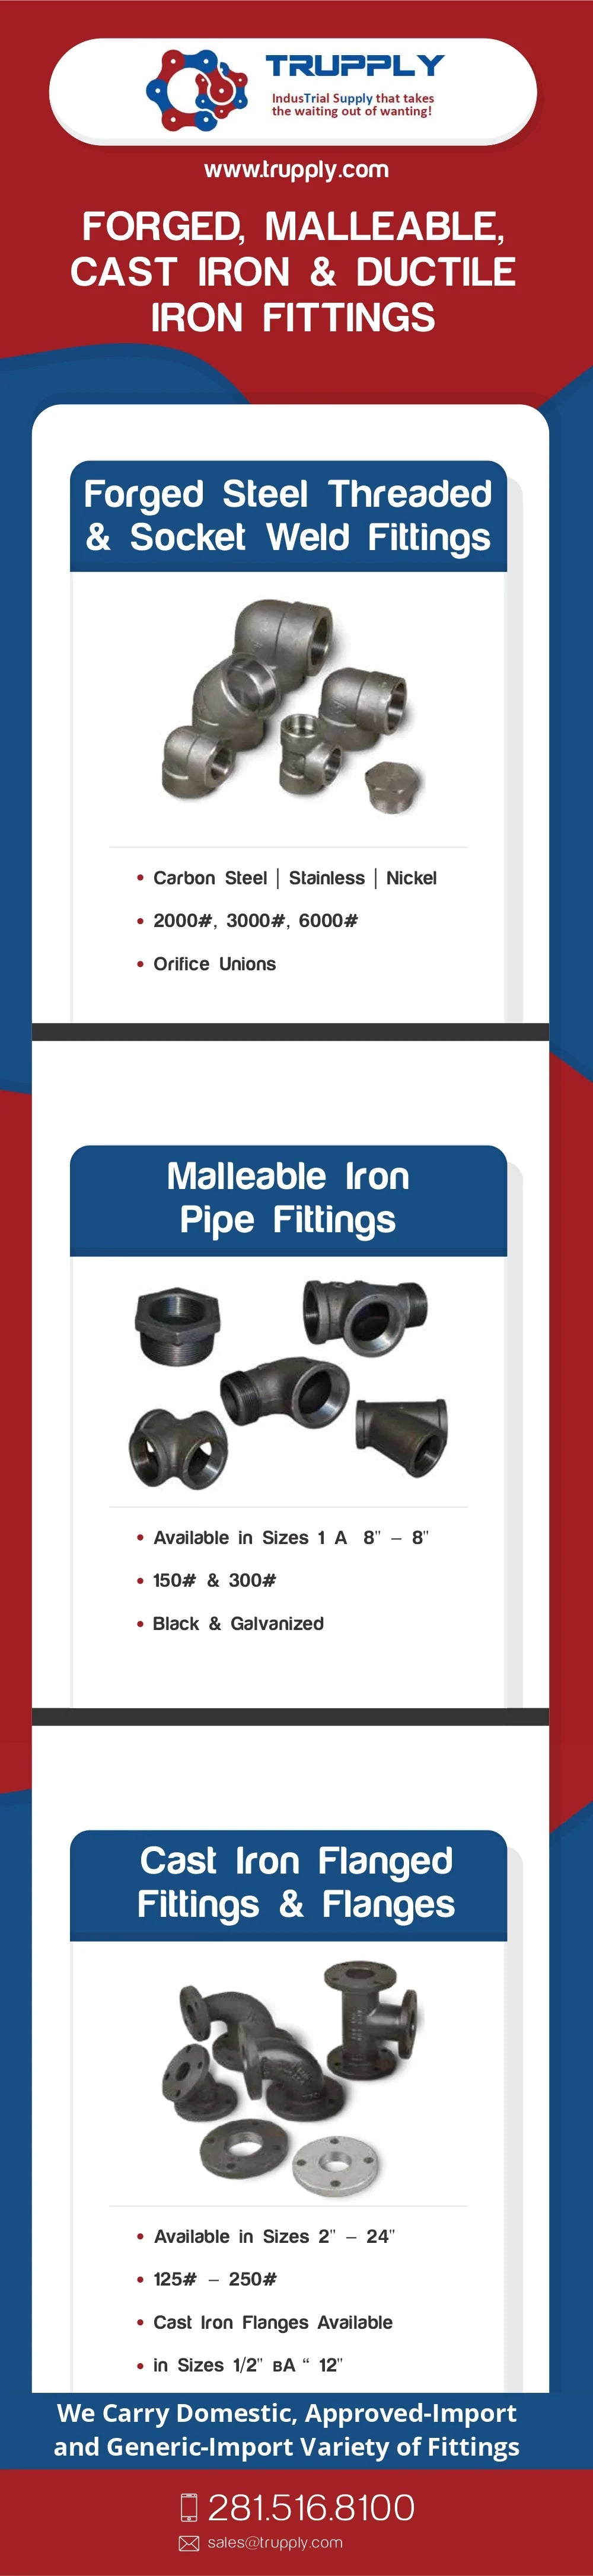 Forged, Malleable, Cast Iron & Ductile Iron Fittings